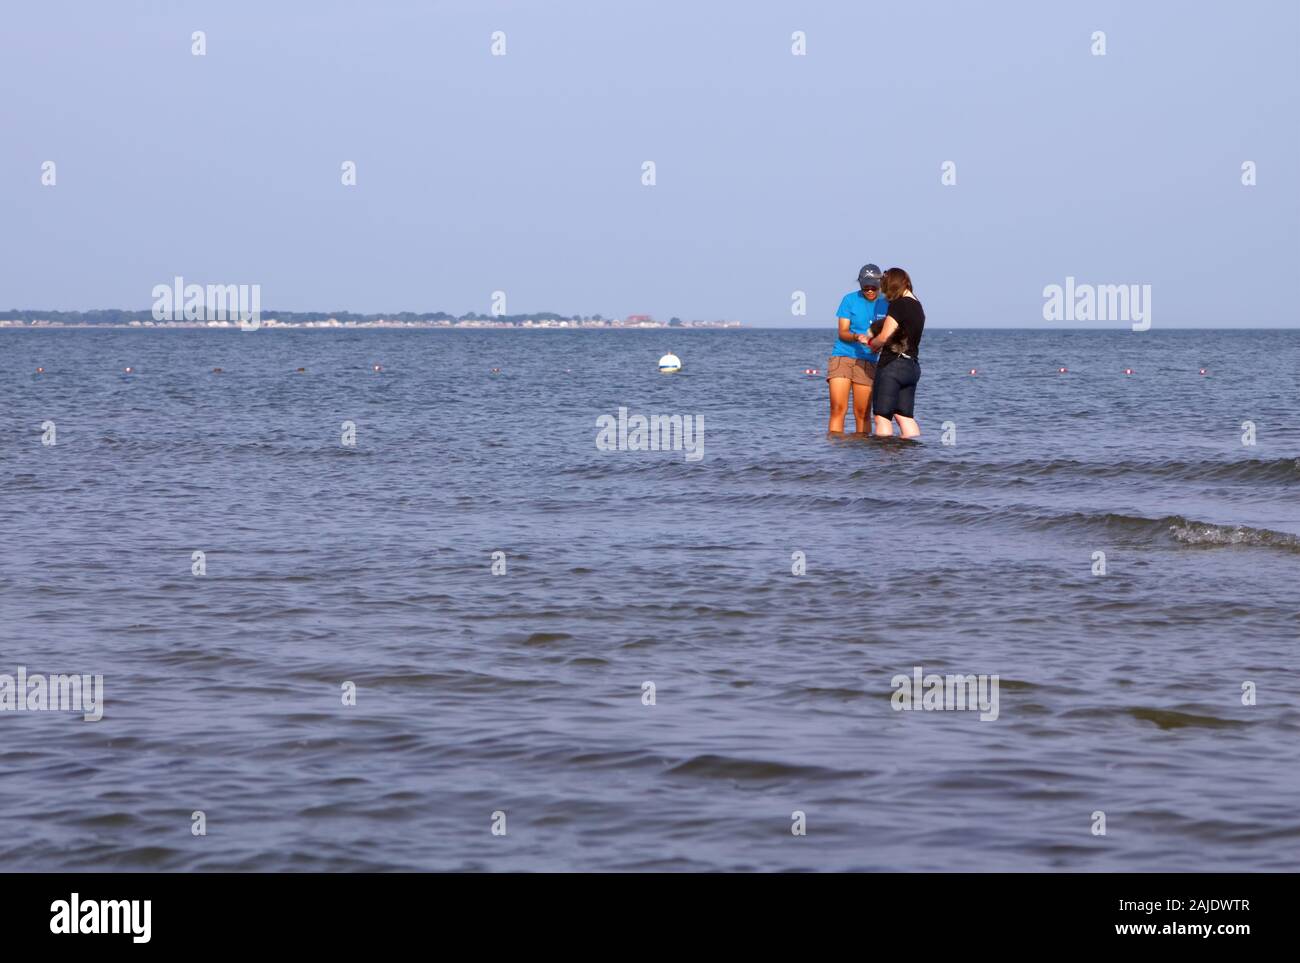 Old Saybrook, CT USA. July 2012. Couple of teenager friends in knee high ocean water by the beach exploring marine life. Stock Photo